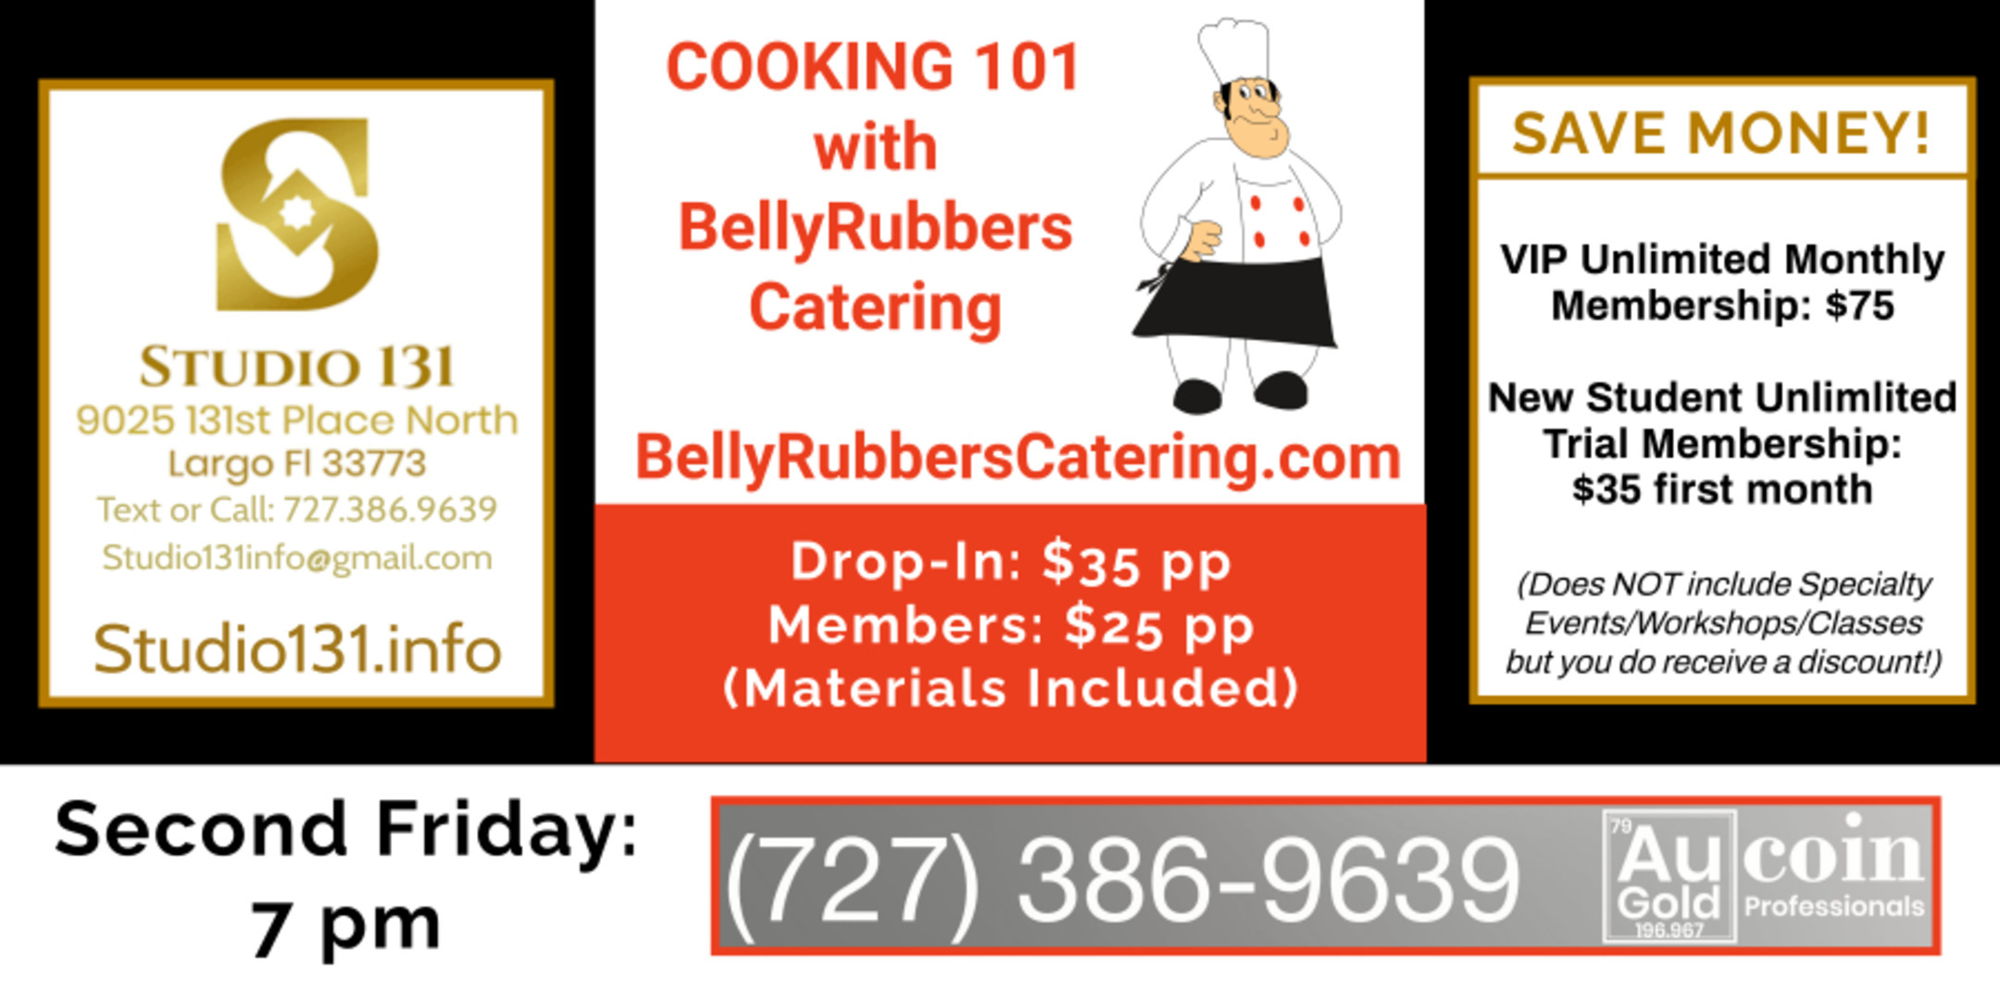 Bellyup: Cooking 101 w/BellyRubbers Catering promotional image